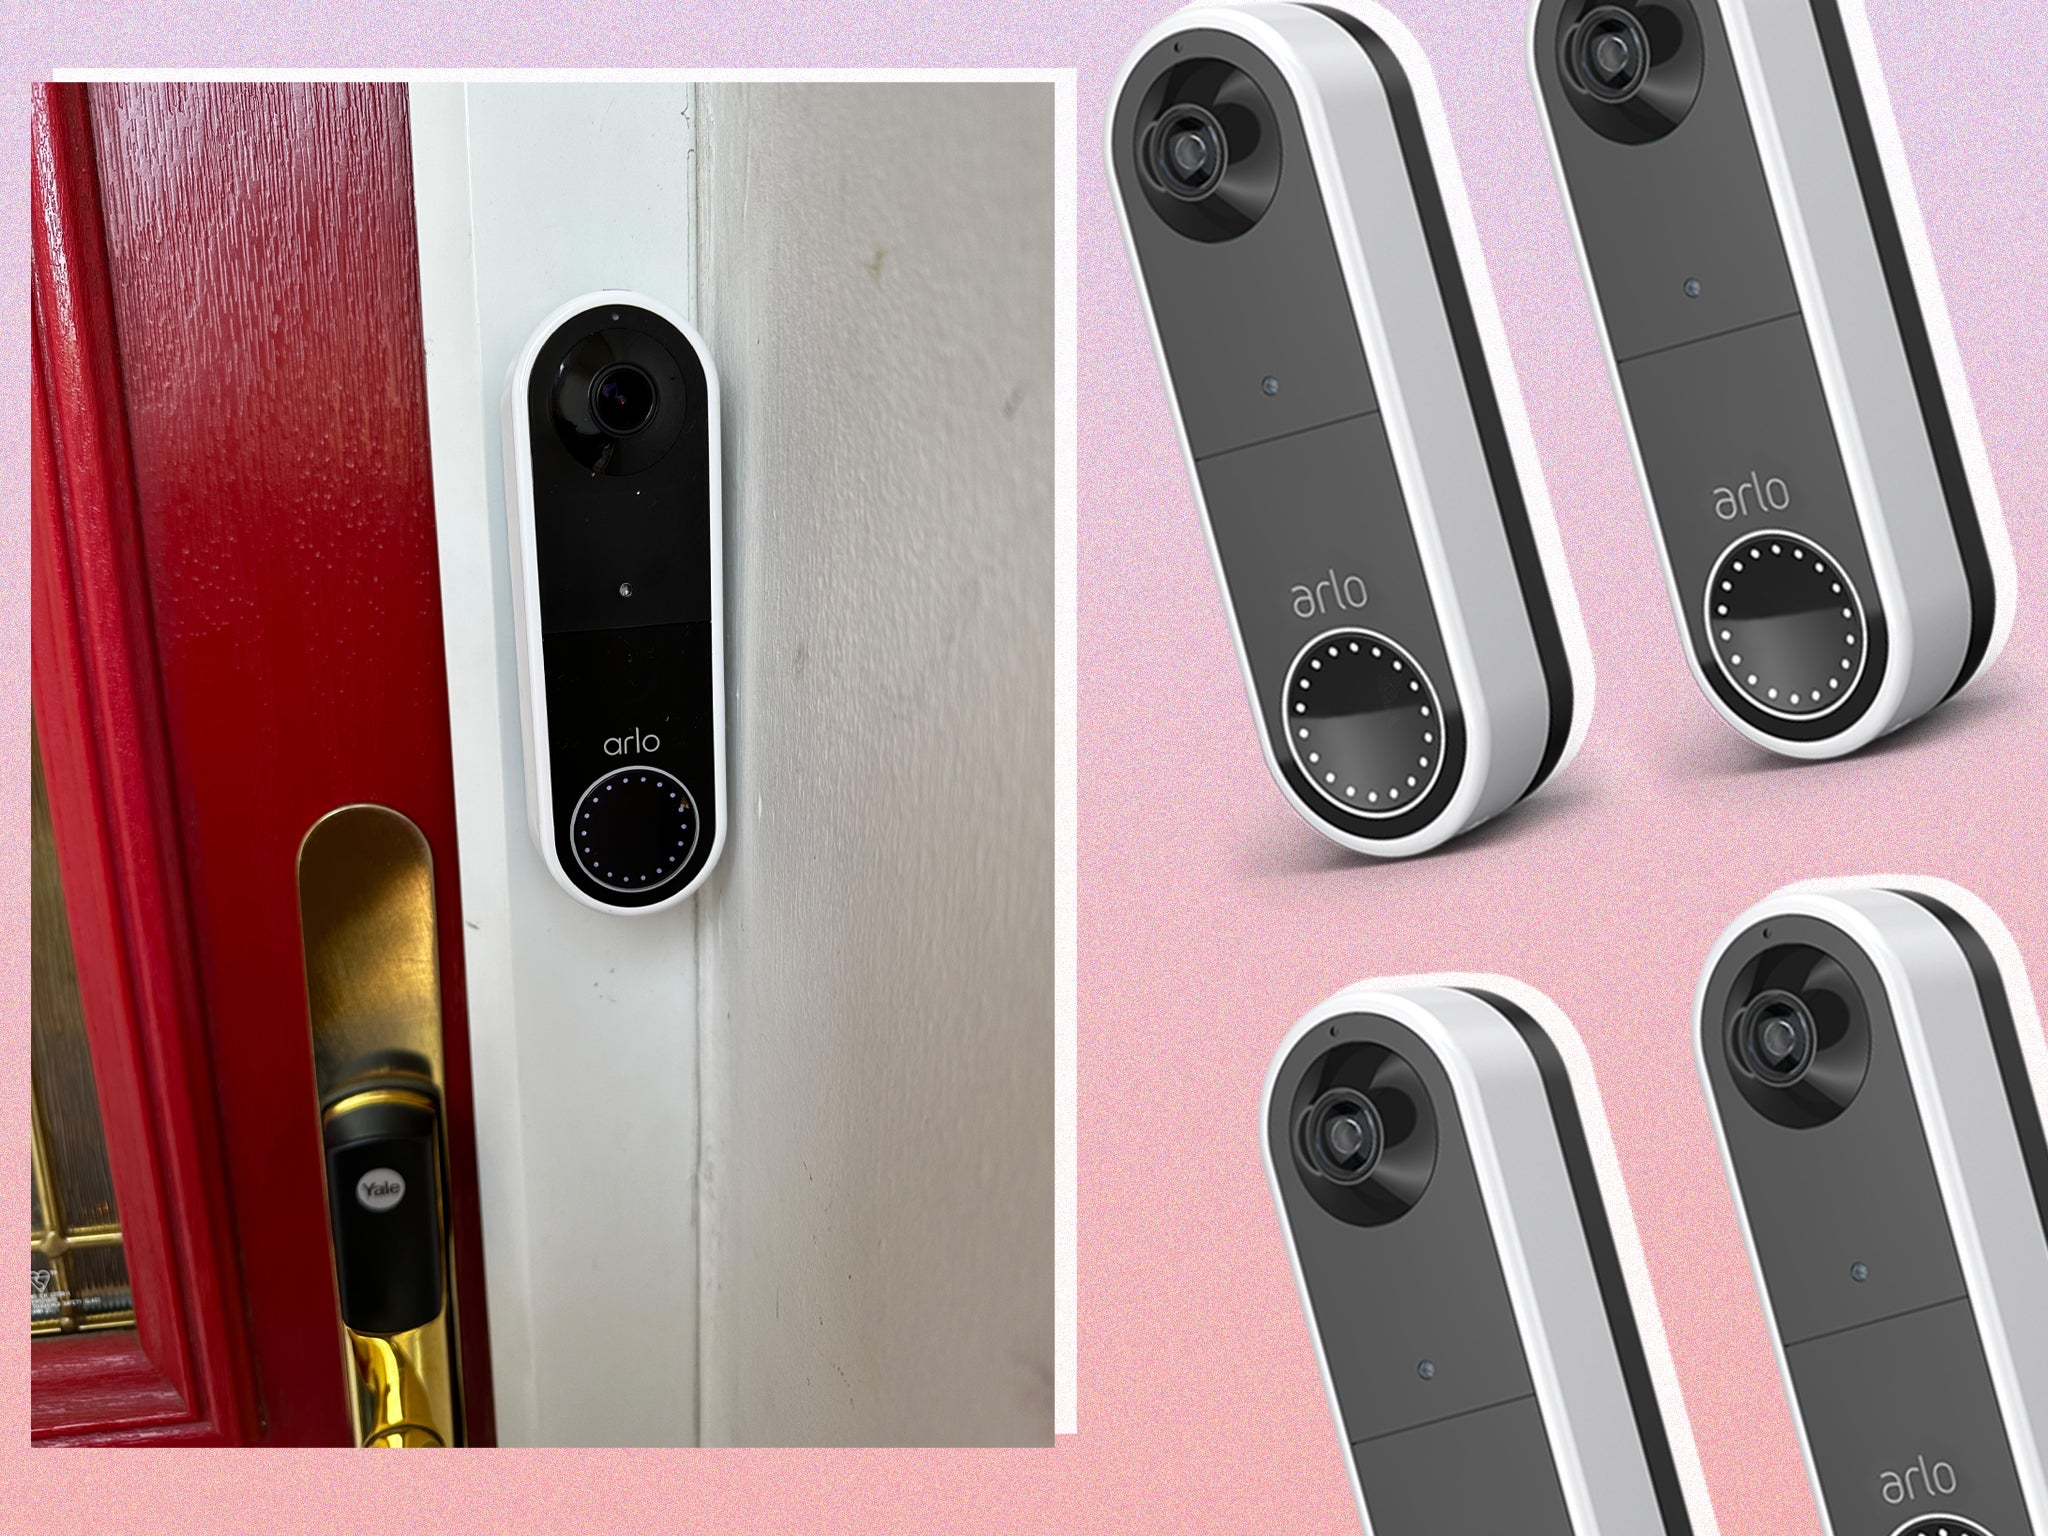 Does Arlo’s wireless video doorbell live up to our home security standards?